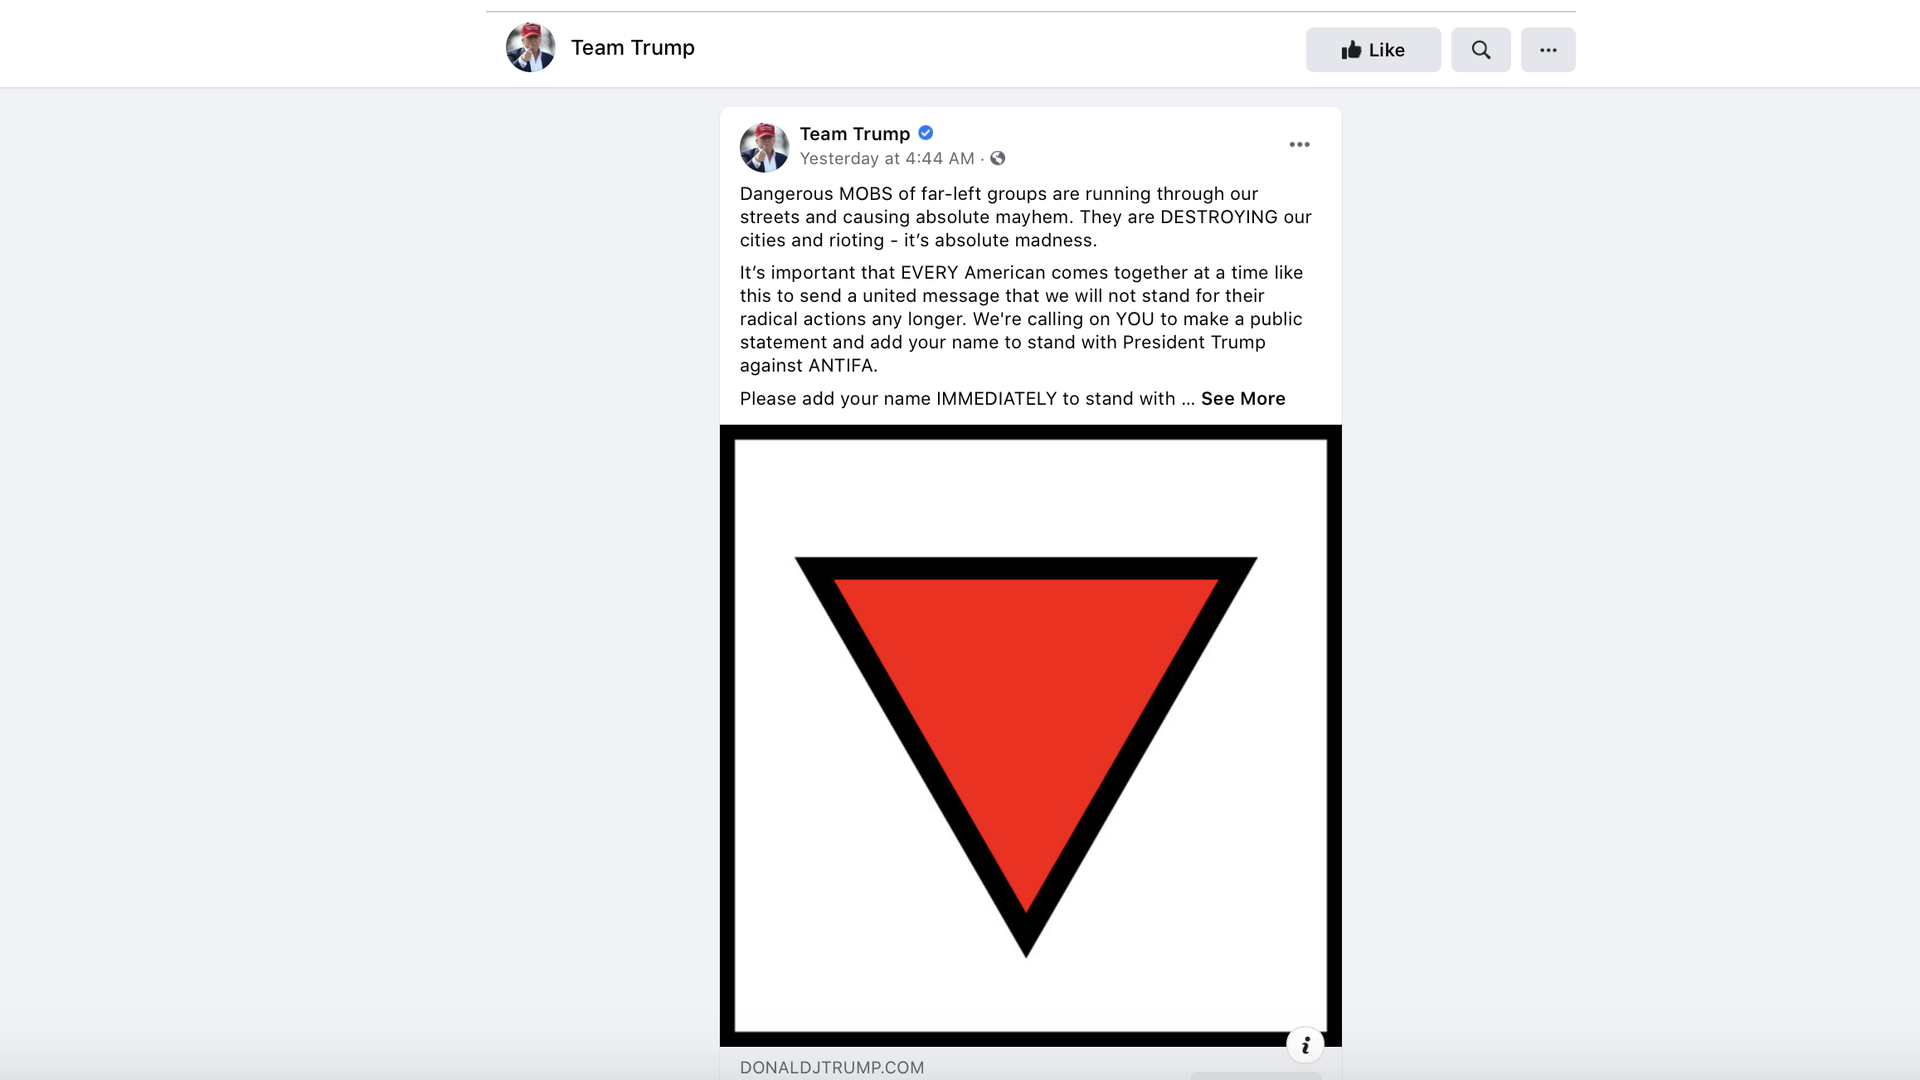 A screenshot of a Trump campaign ad depicting a red inverted triangle with a black border.